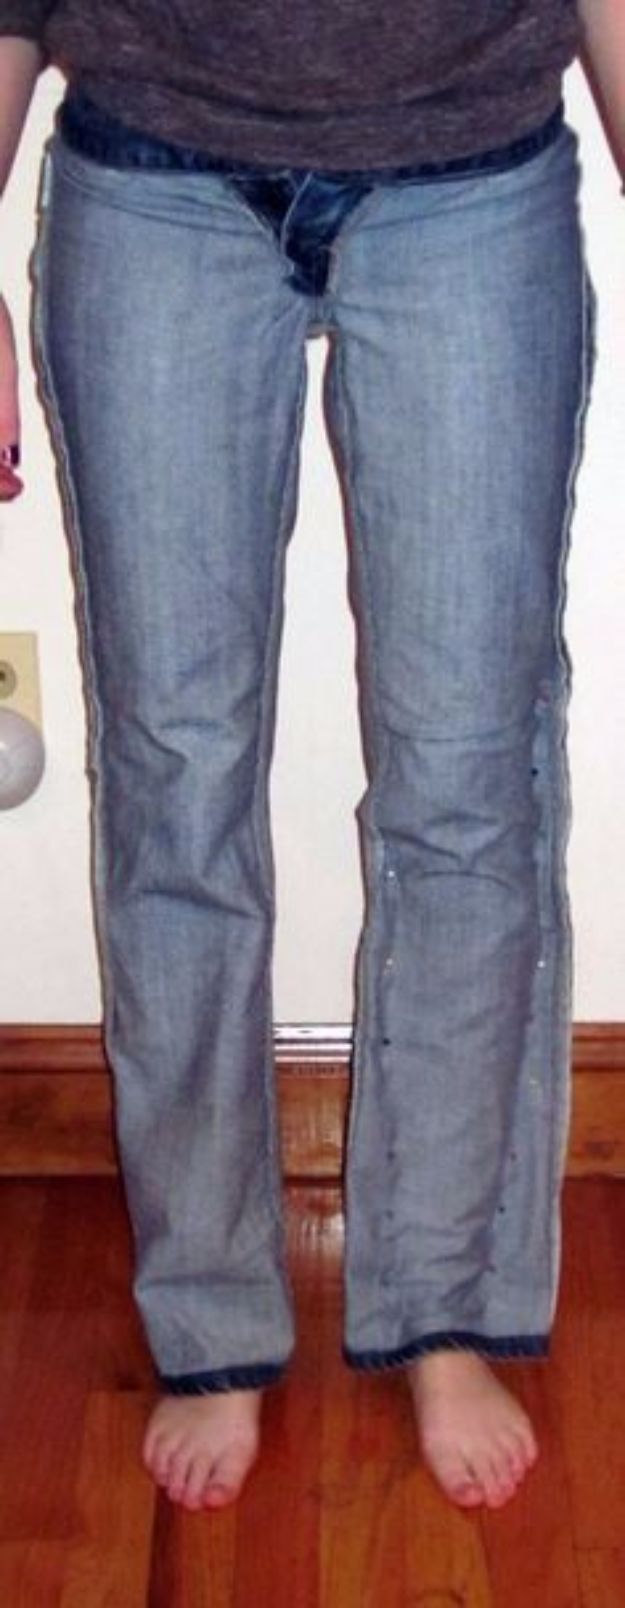 DIY Jeans Makeovers - Flares to Straight Leg - Easy Crafts and Tutorials to Refashion and Upcycle Your Jeans and Create Ripped, Distressed, Bleach, Lace Edge, Cut Off, Skinny, Shorts, Skirts, Galaxy and Painted Jeans Ideas - Cool Denim Fashions for Teens, Teenagers, Women #diyideas #diyclothes #clothinghacks #teencrafts